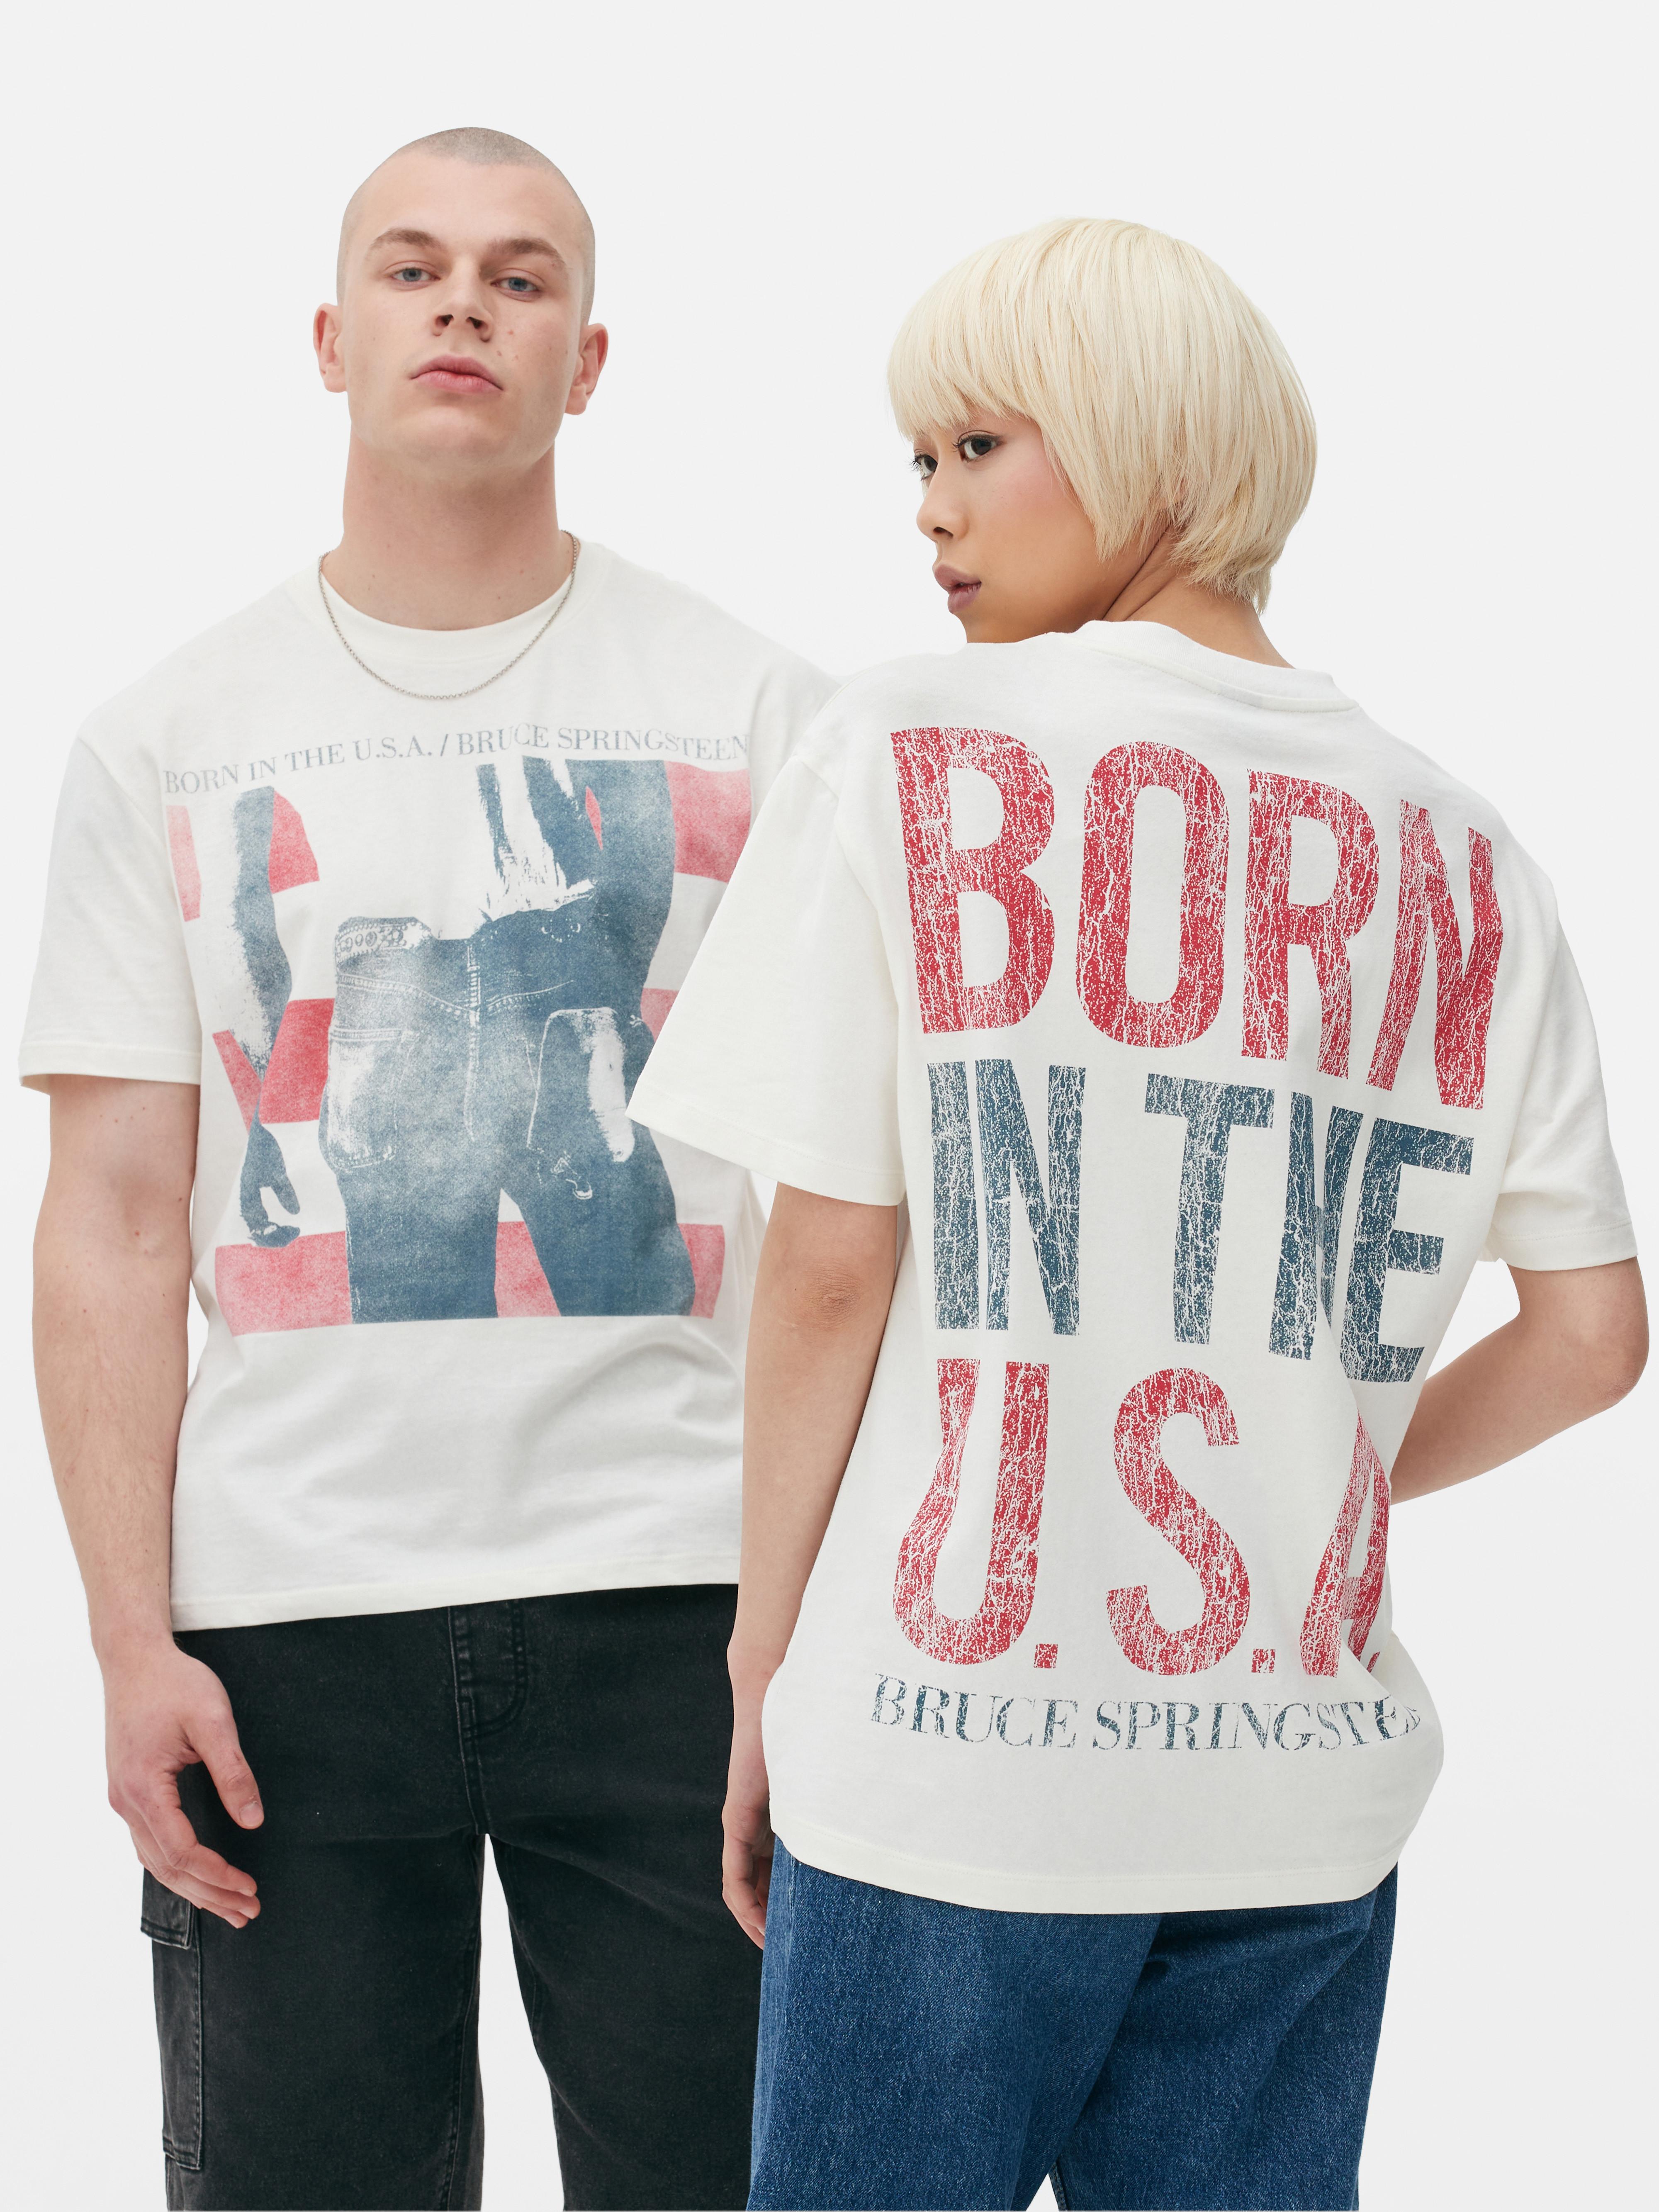 Bruce Springsteen Born in the U.S.A. T-shirt